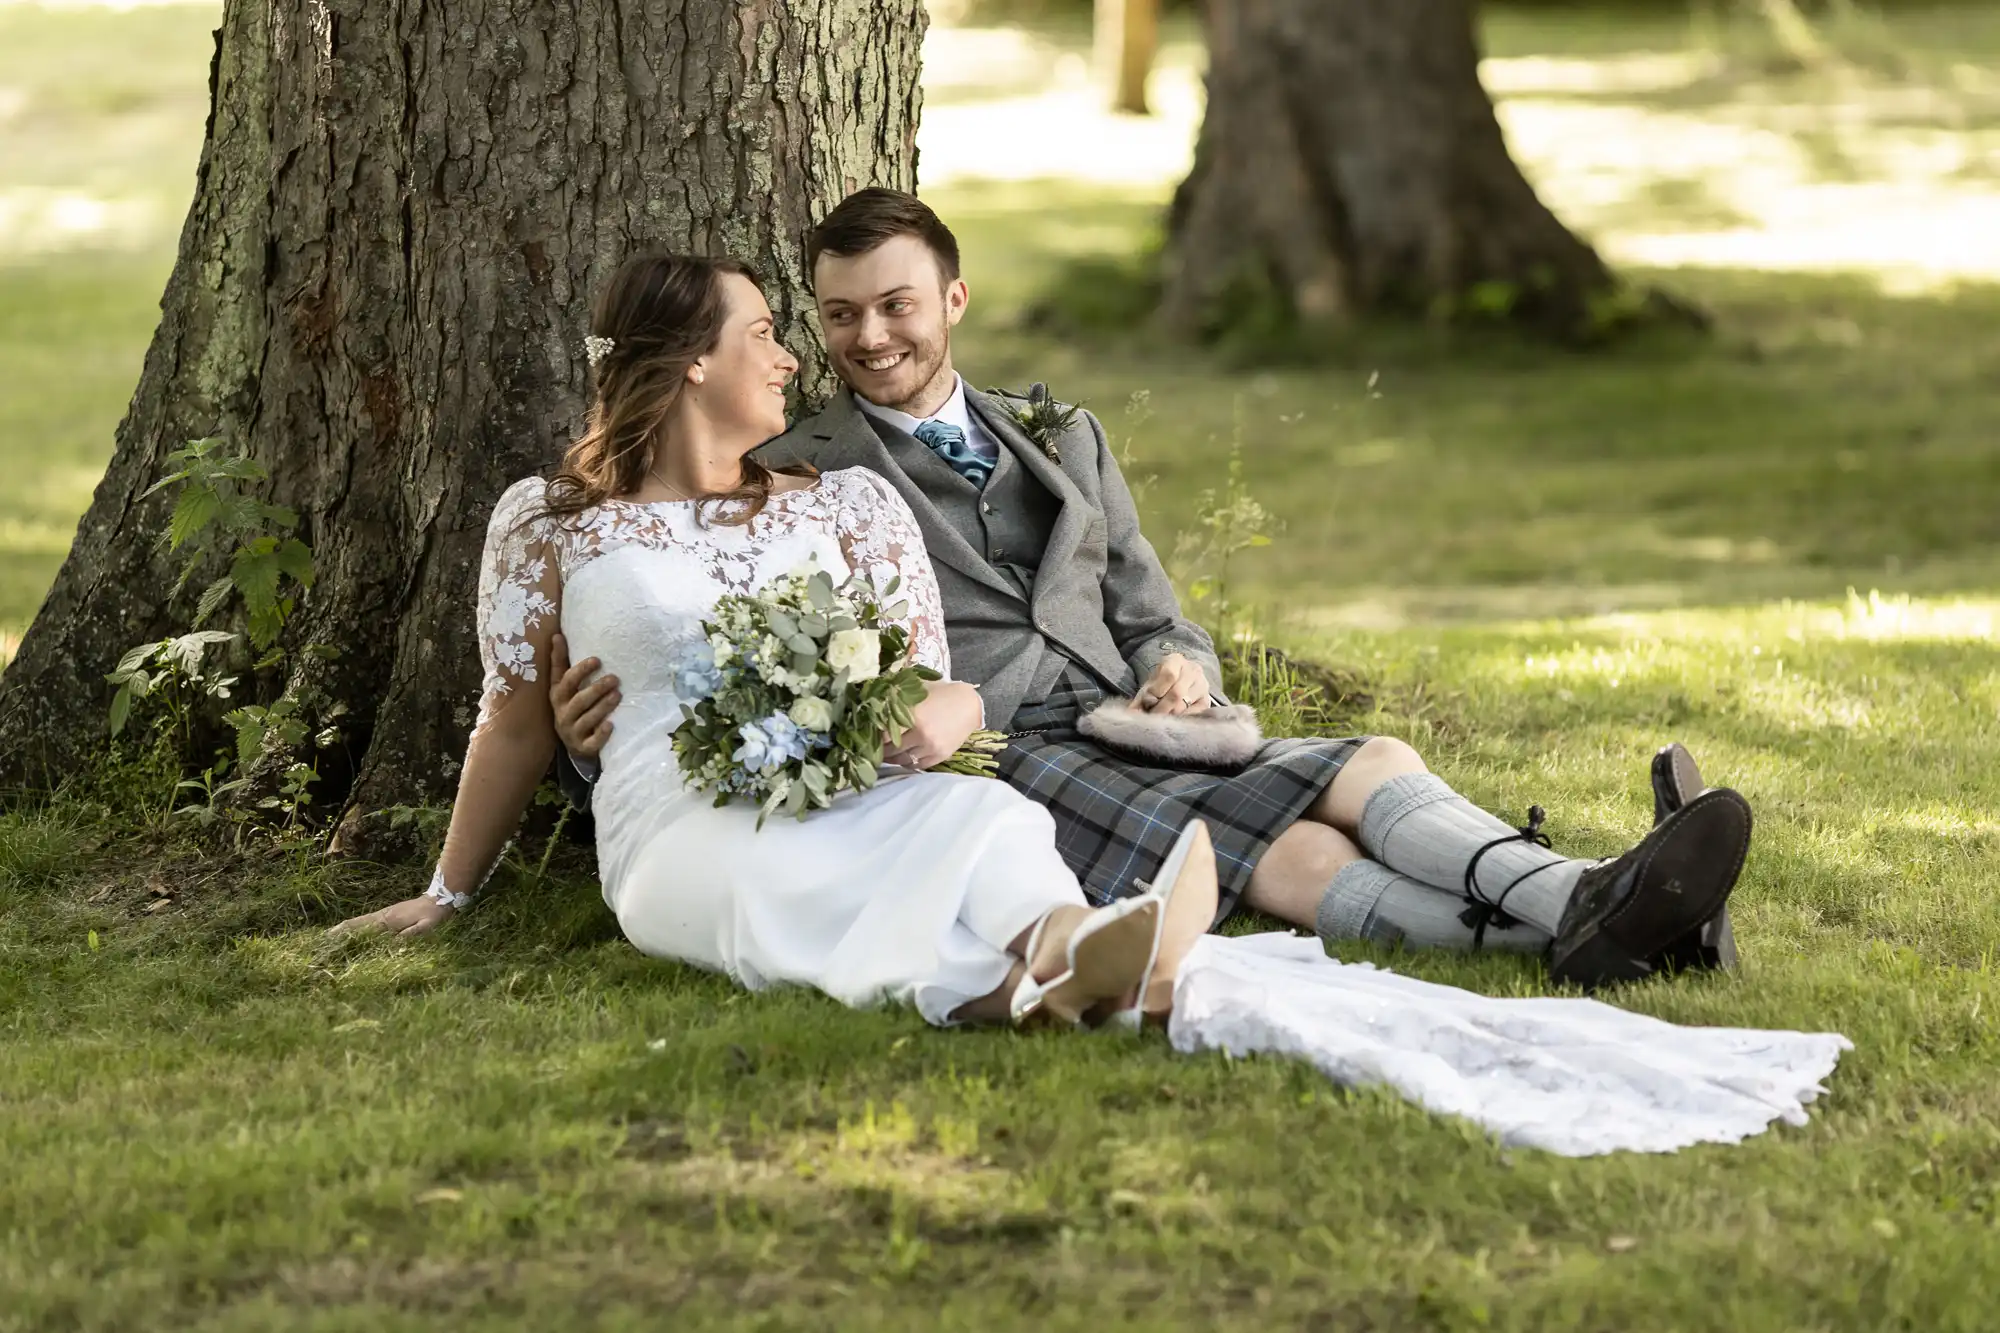 A bride in a white lace dress and a groom in a kilt and tweed jacket sitting under a tree, laughing together, surrounded by grass.